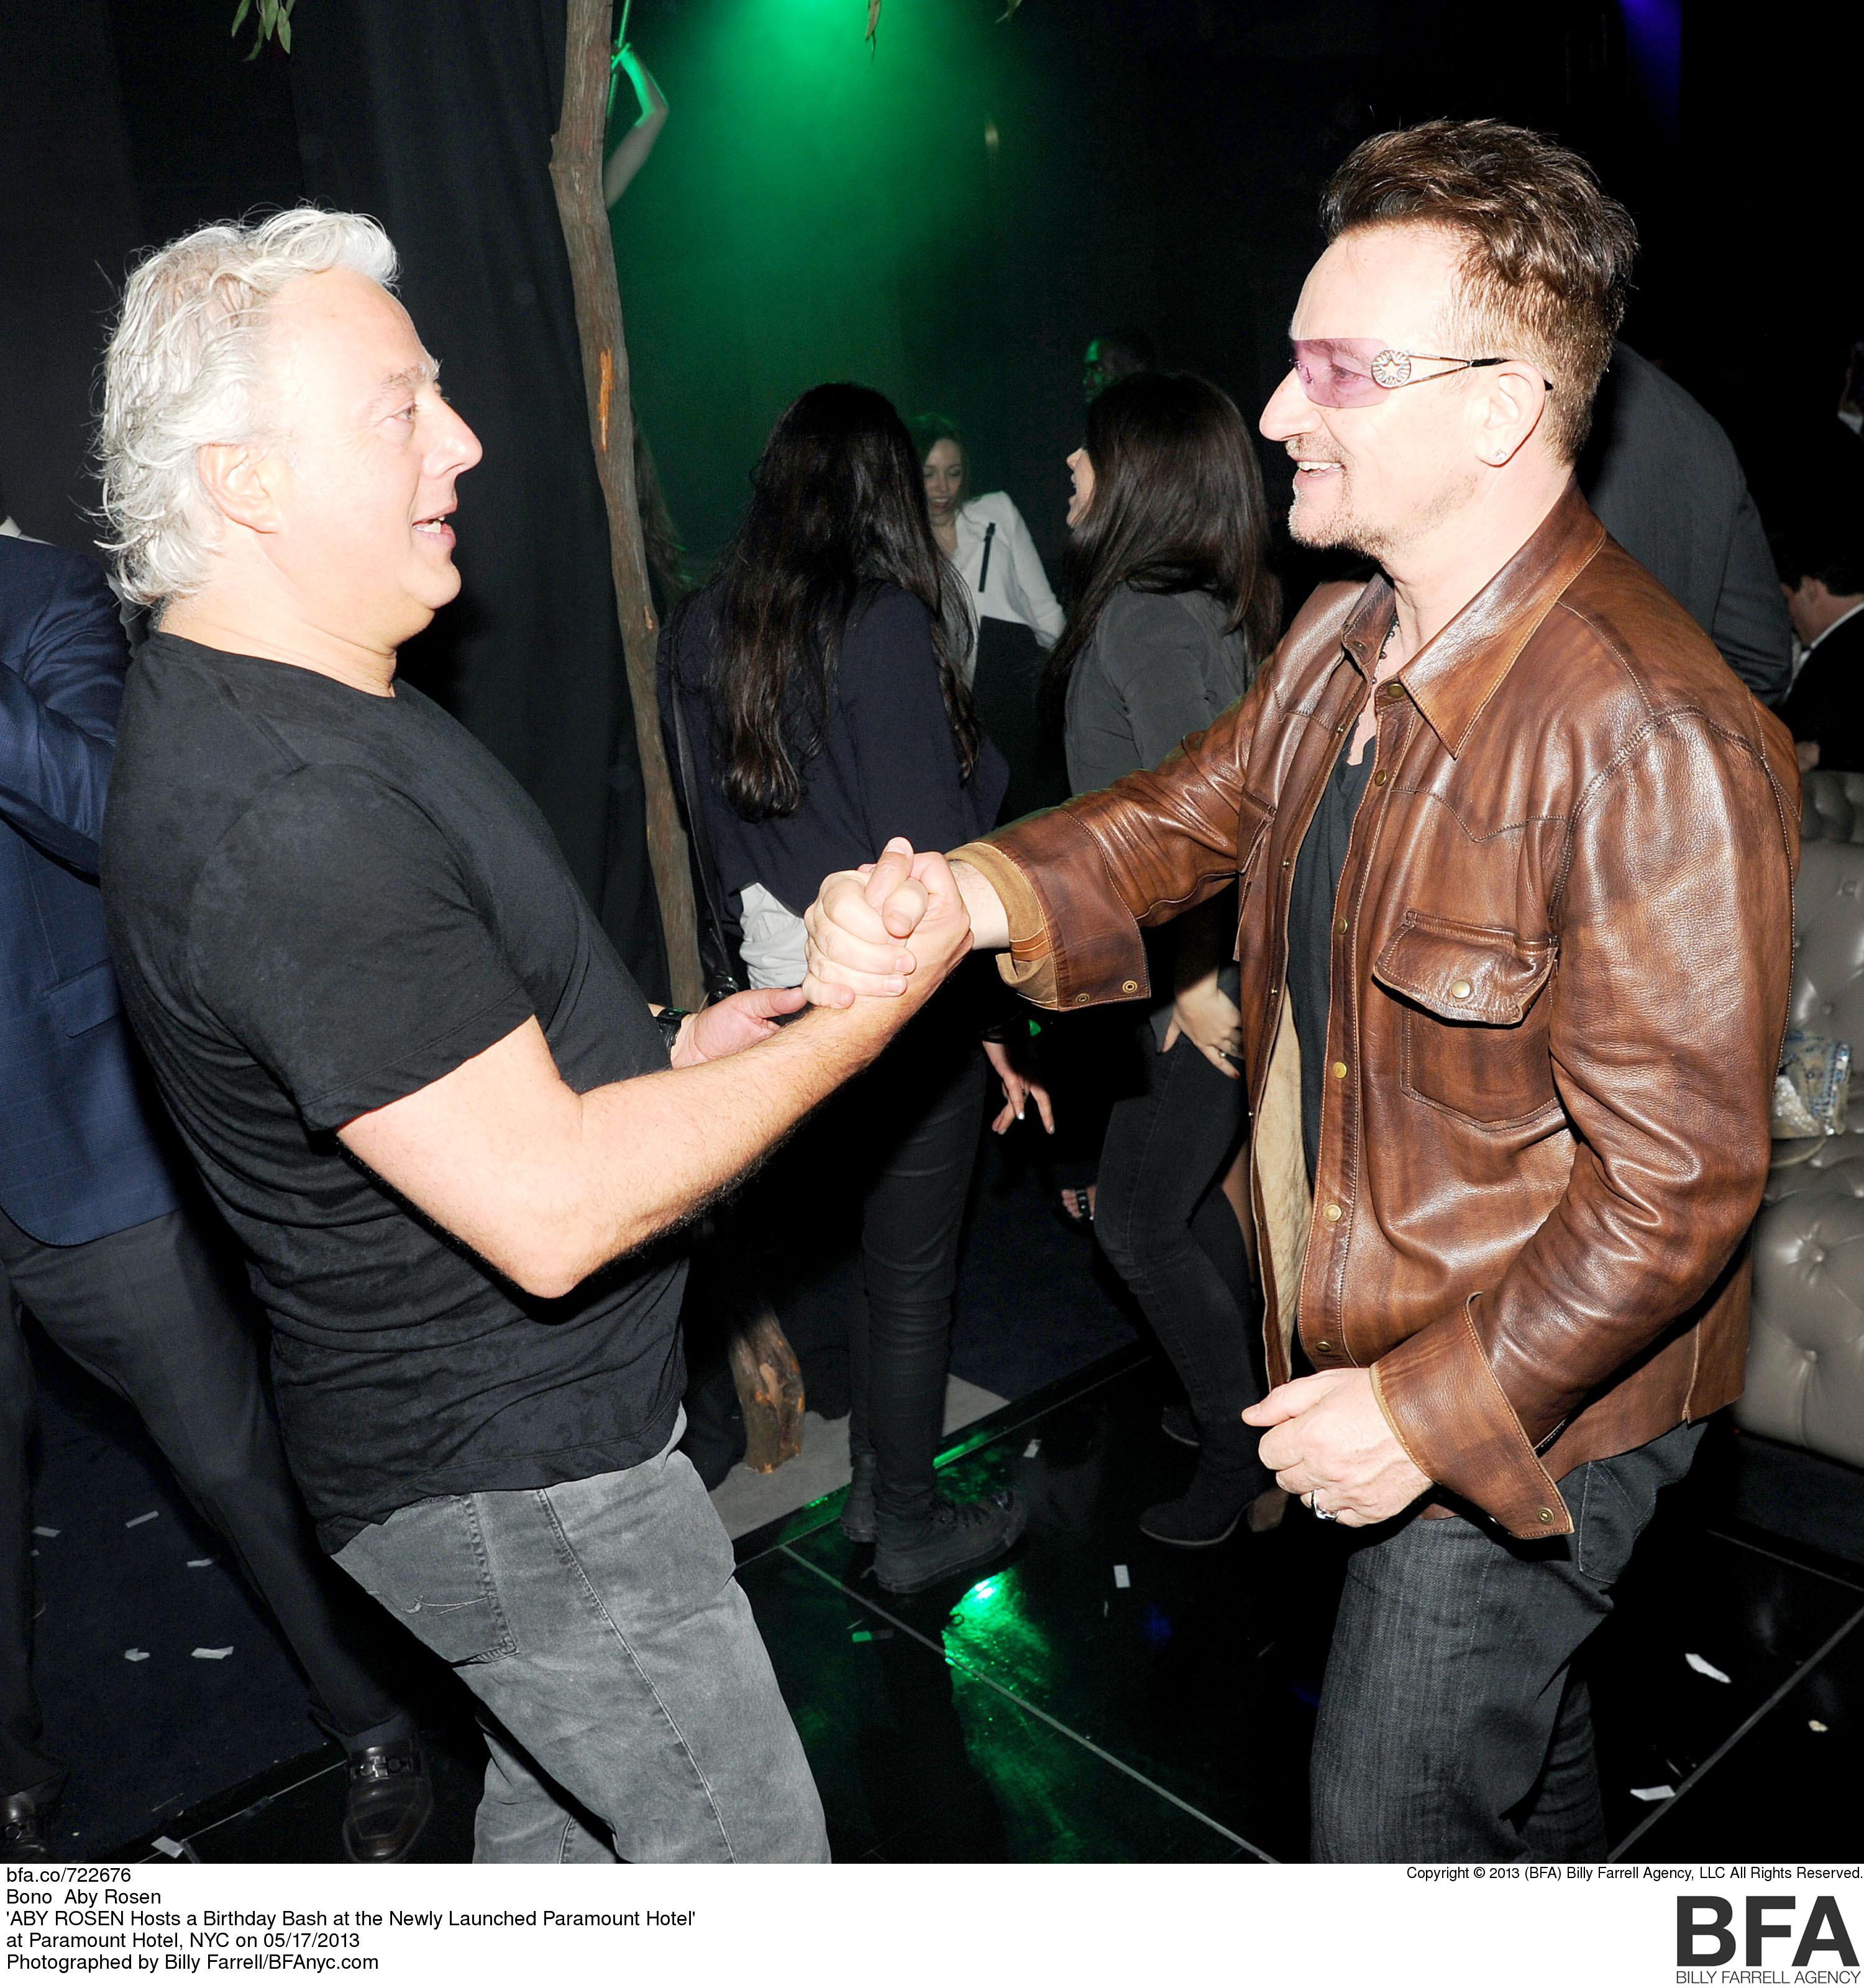 Bono & Aby Rosen - ABY ROSEN Hosts a Birthday Bash at the Newly Launched Paramount Hotel